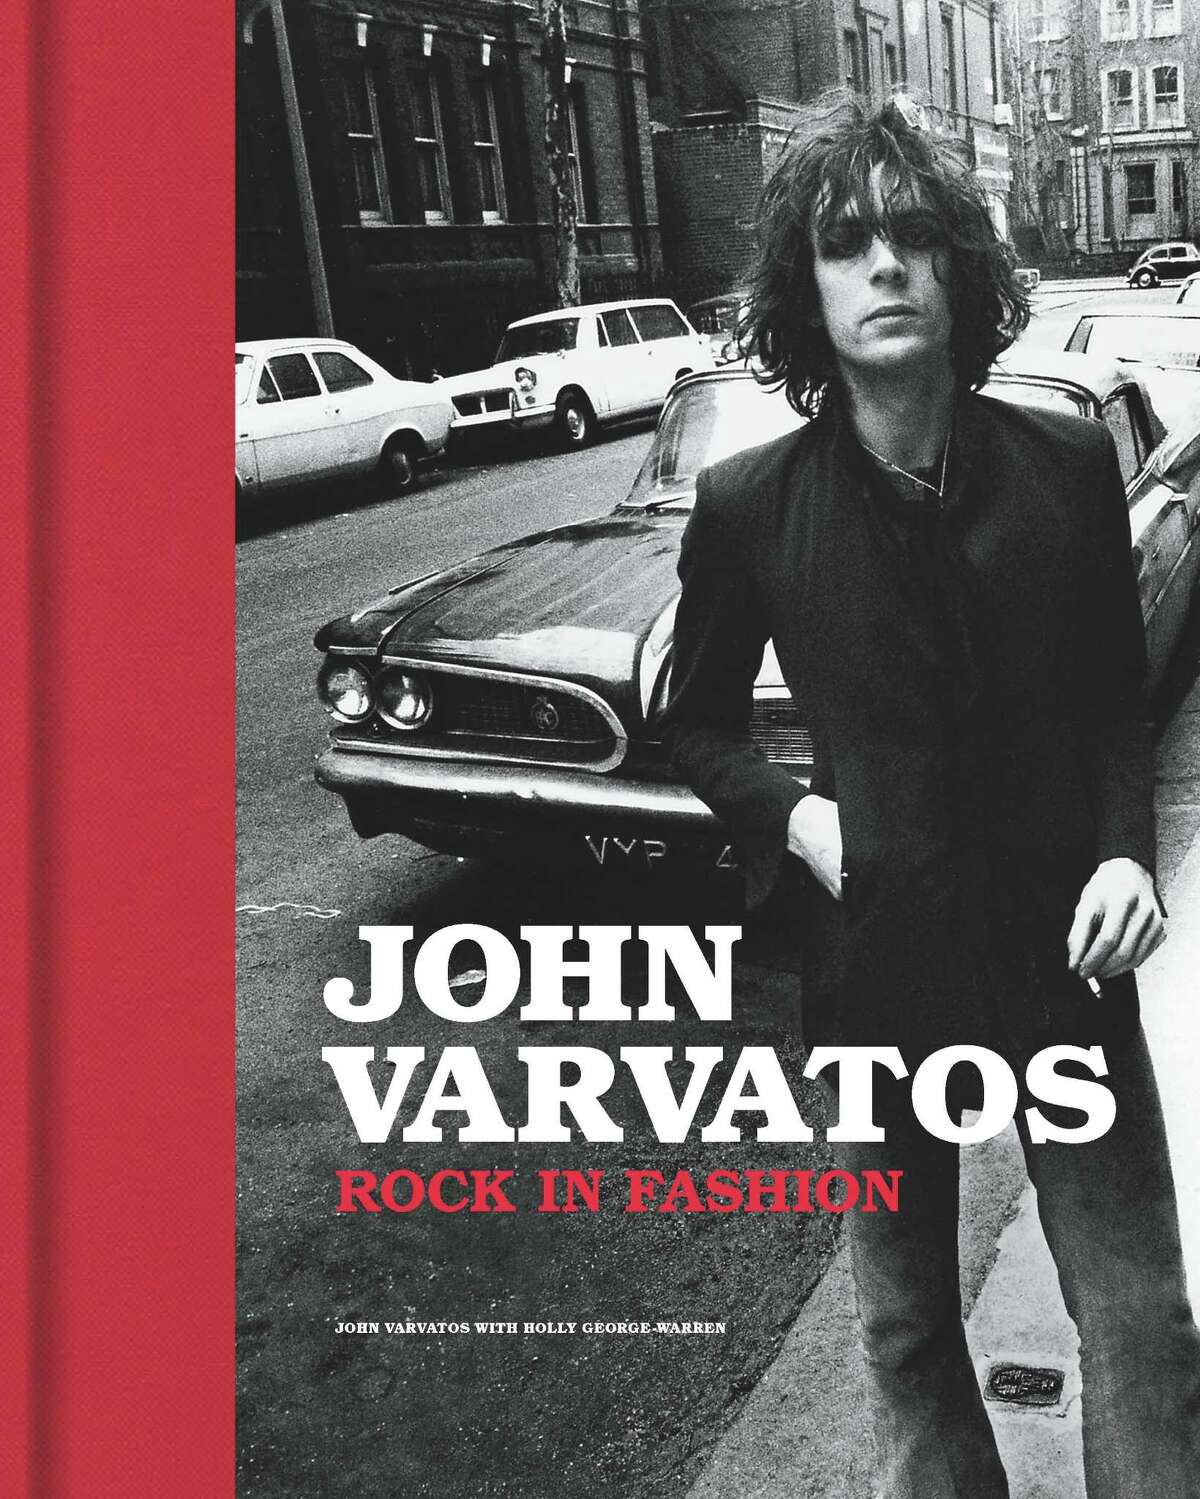 Detroit native menswear designer John Varvatos has recently opened his first Houston store in the Galleria. His new book, "Rock in Fashion," chronicles his love of fashion through his love of music.